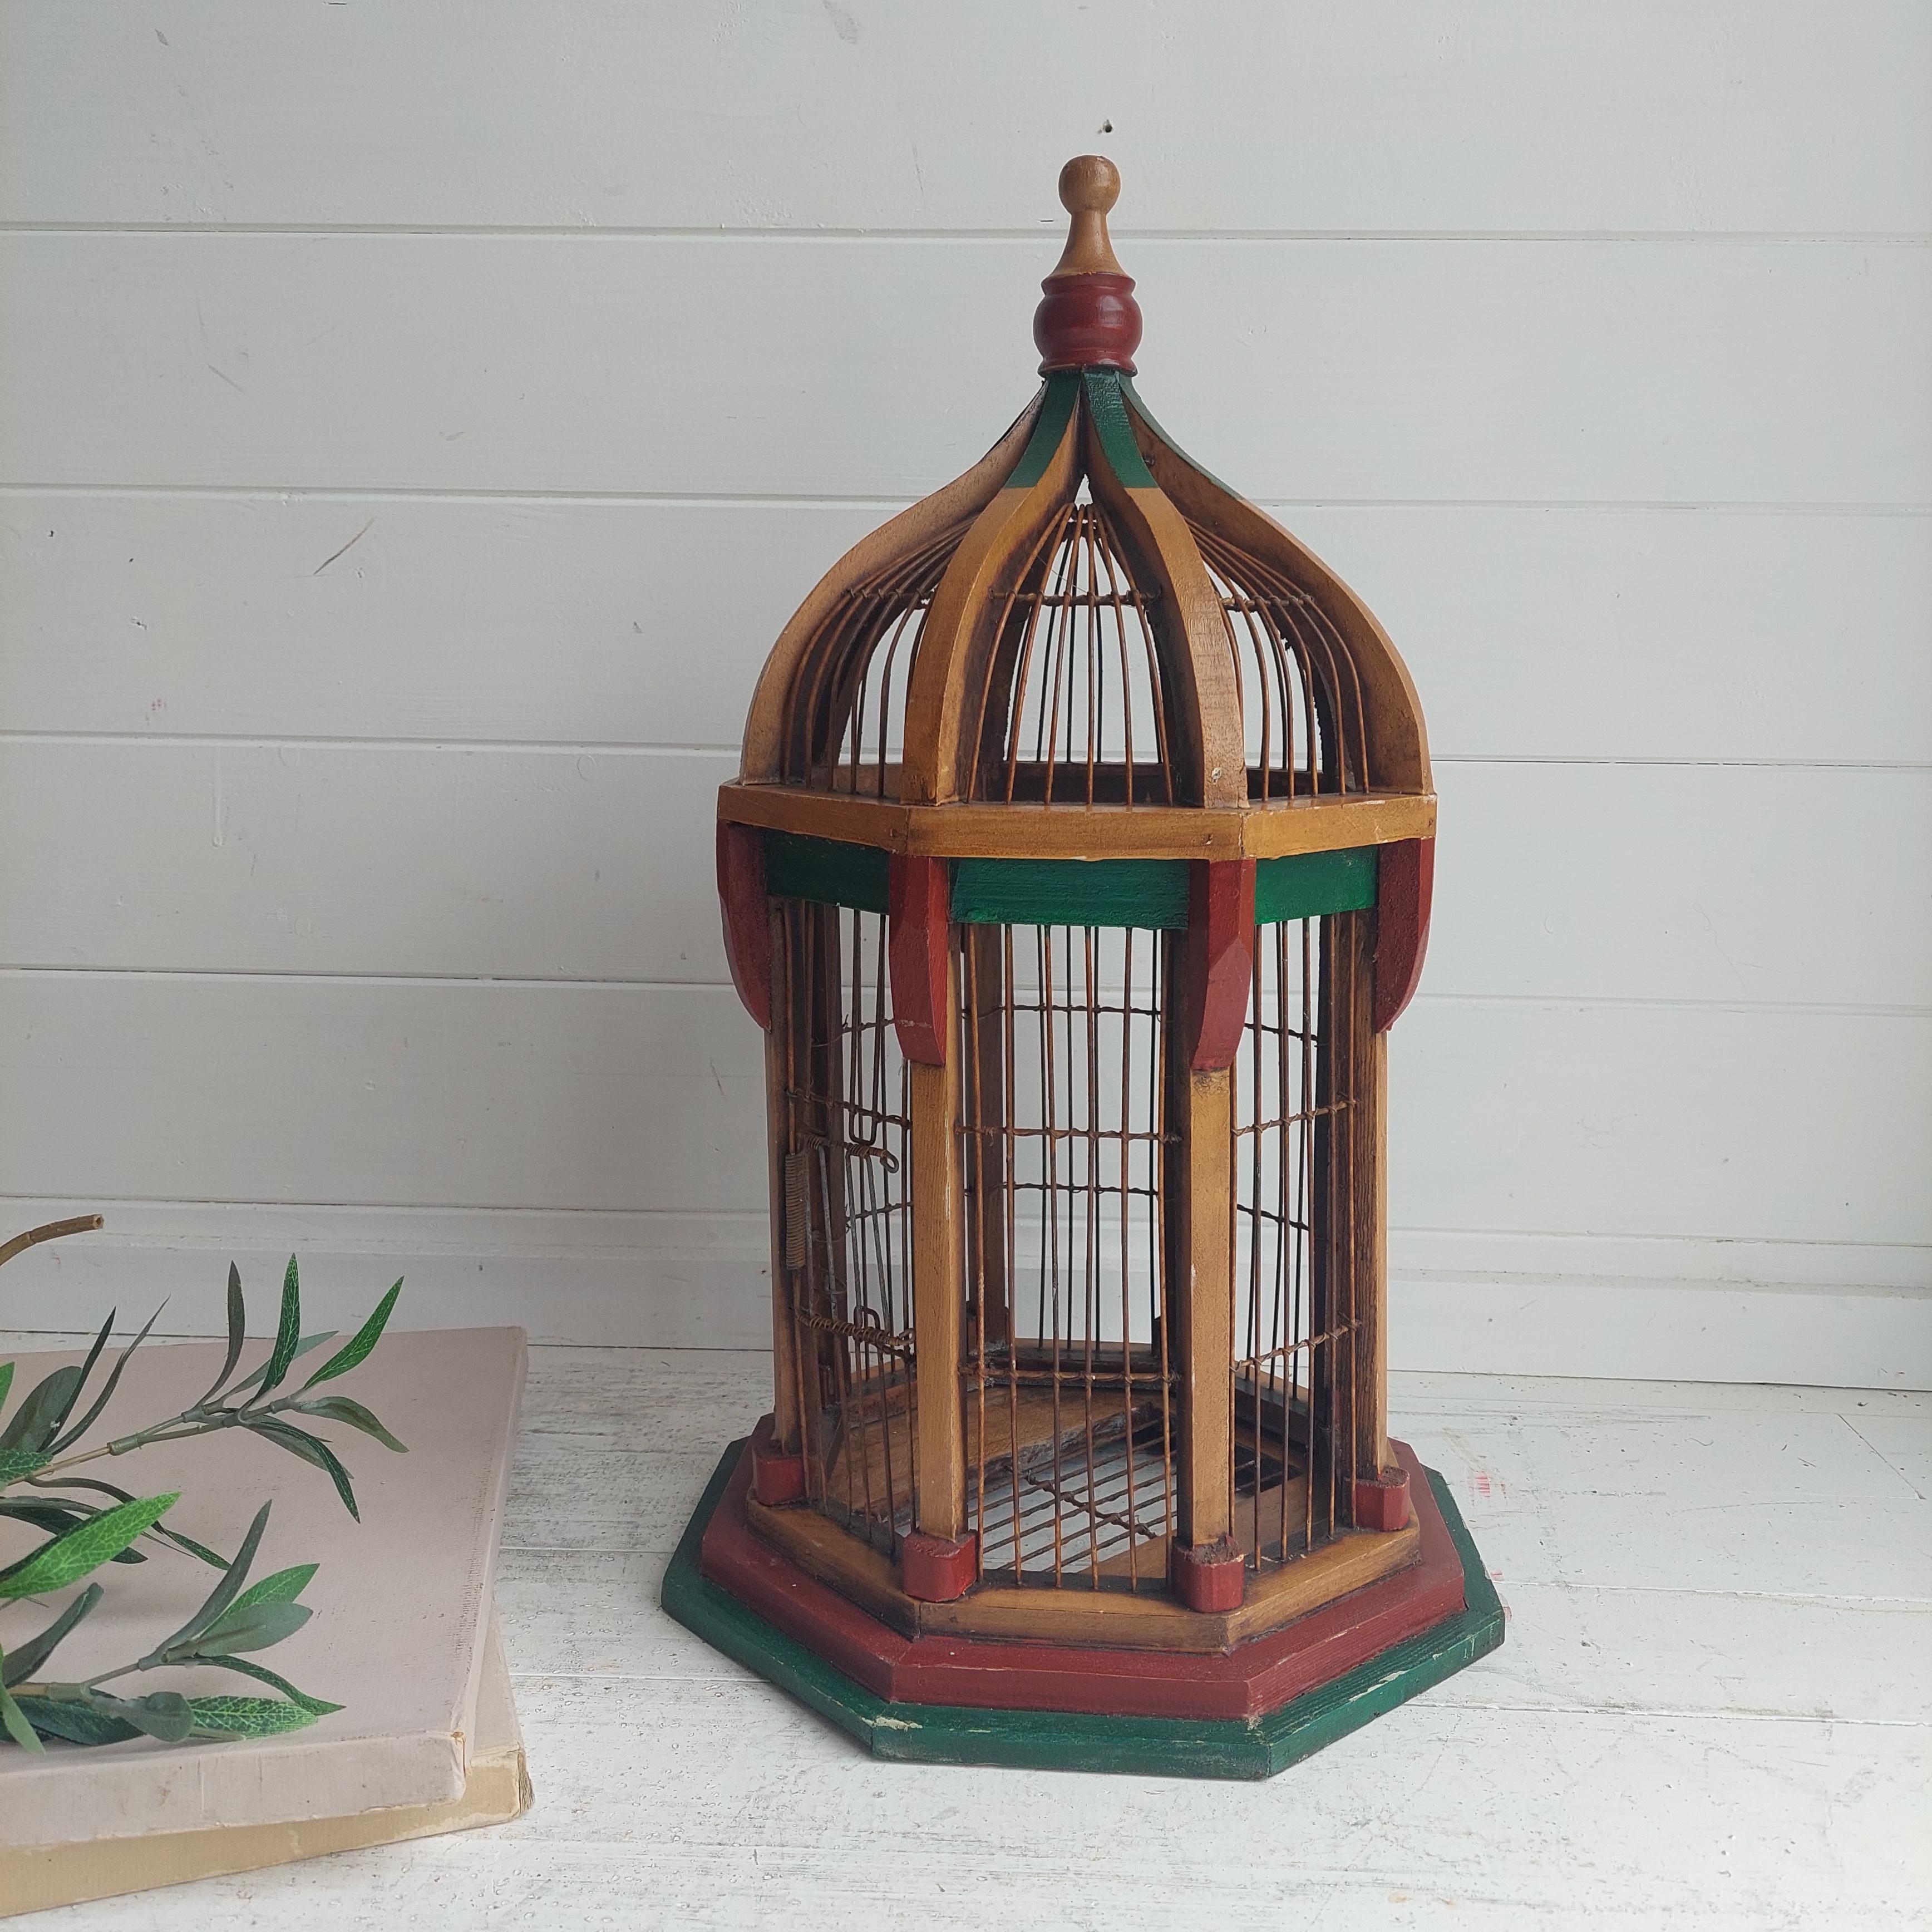 European Antique  Architectural Dome Painted Bird Cage, Victorian Style